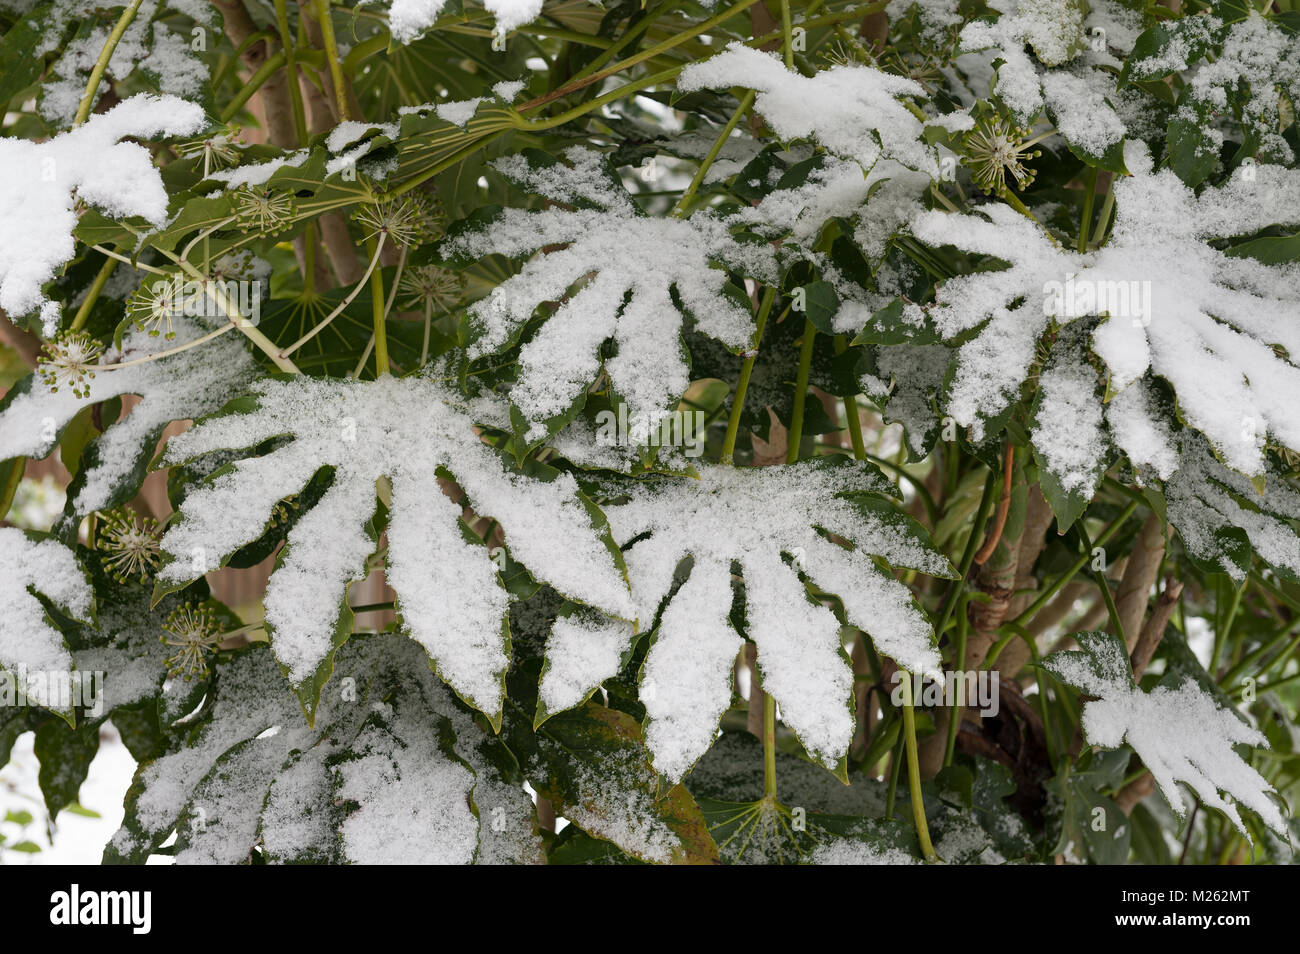 False Castor Oil Plant, Japanese Aralia, Fatsia japonica, evergreen distinct palmately lobed leaves coated in snow spreading drooping under the weight Stock Photo